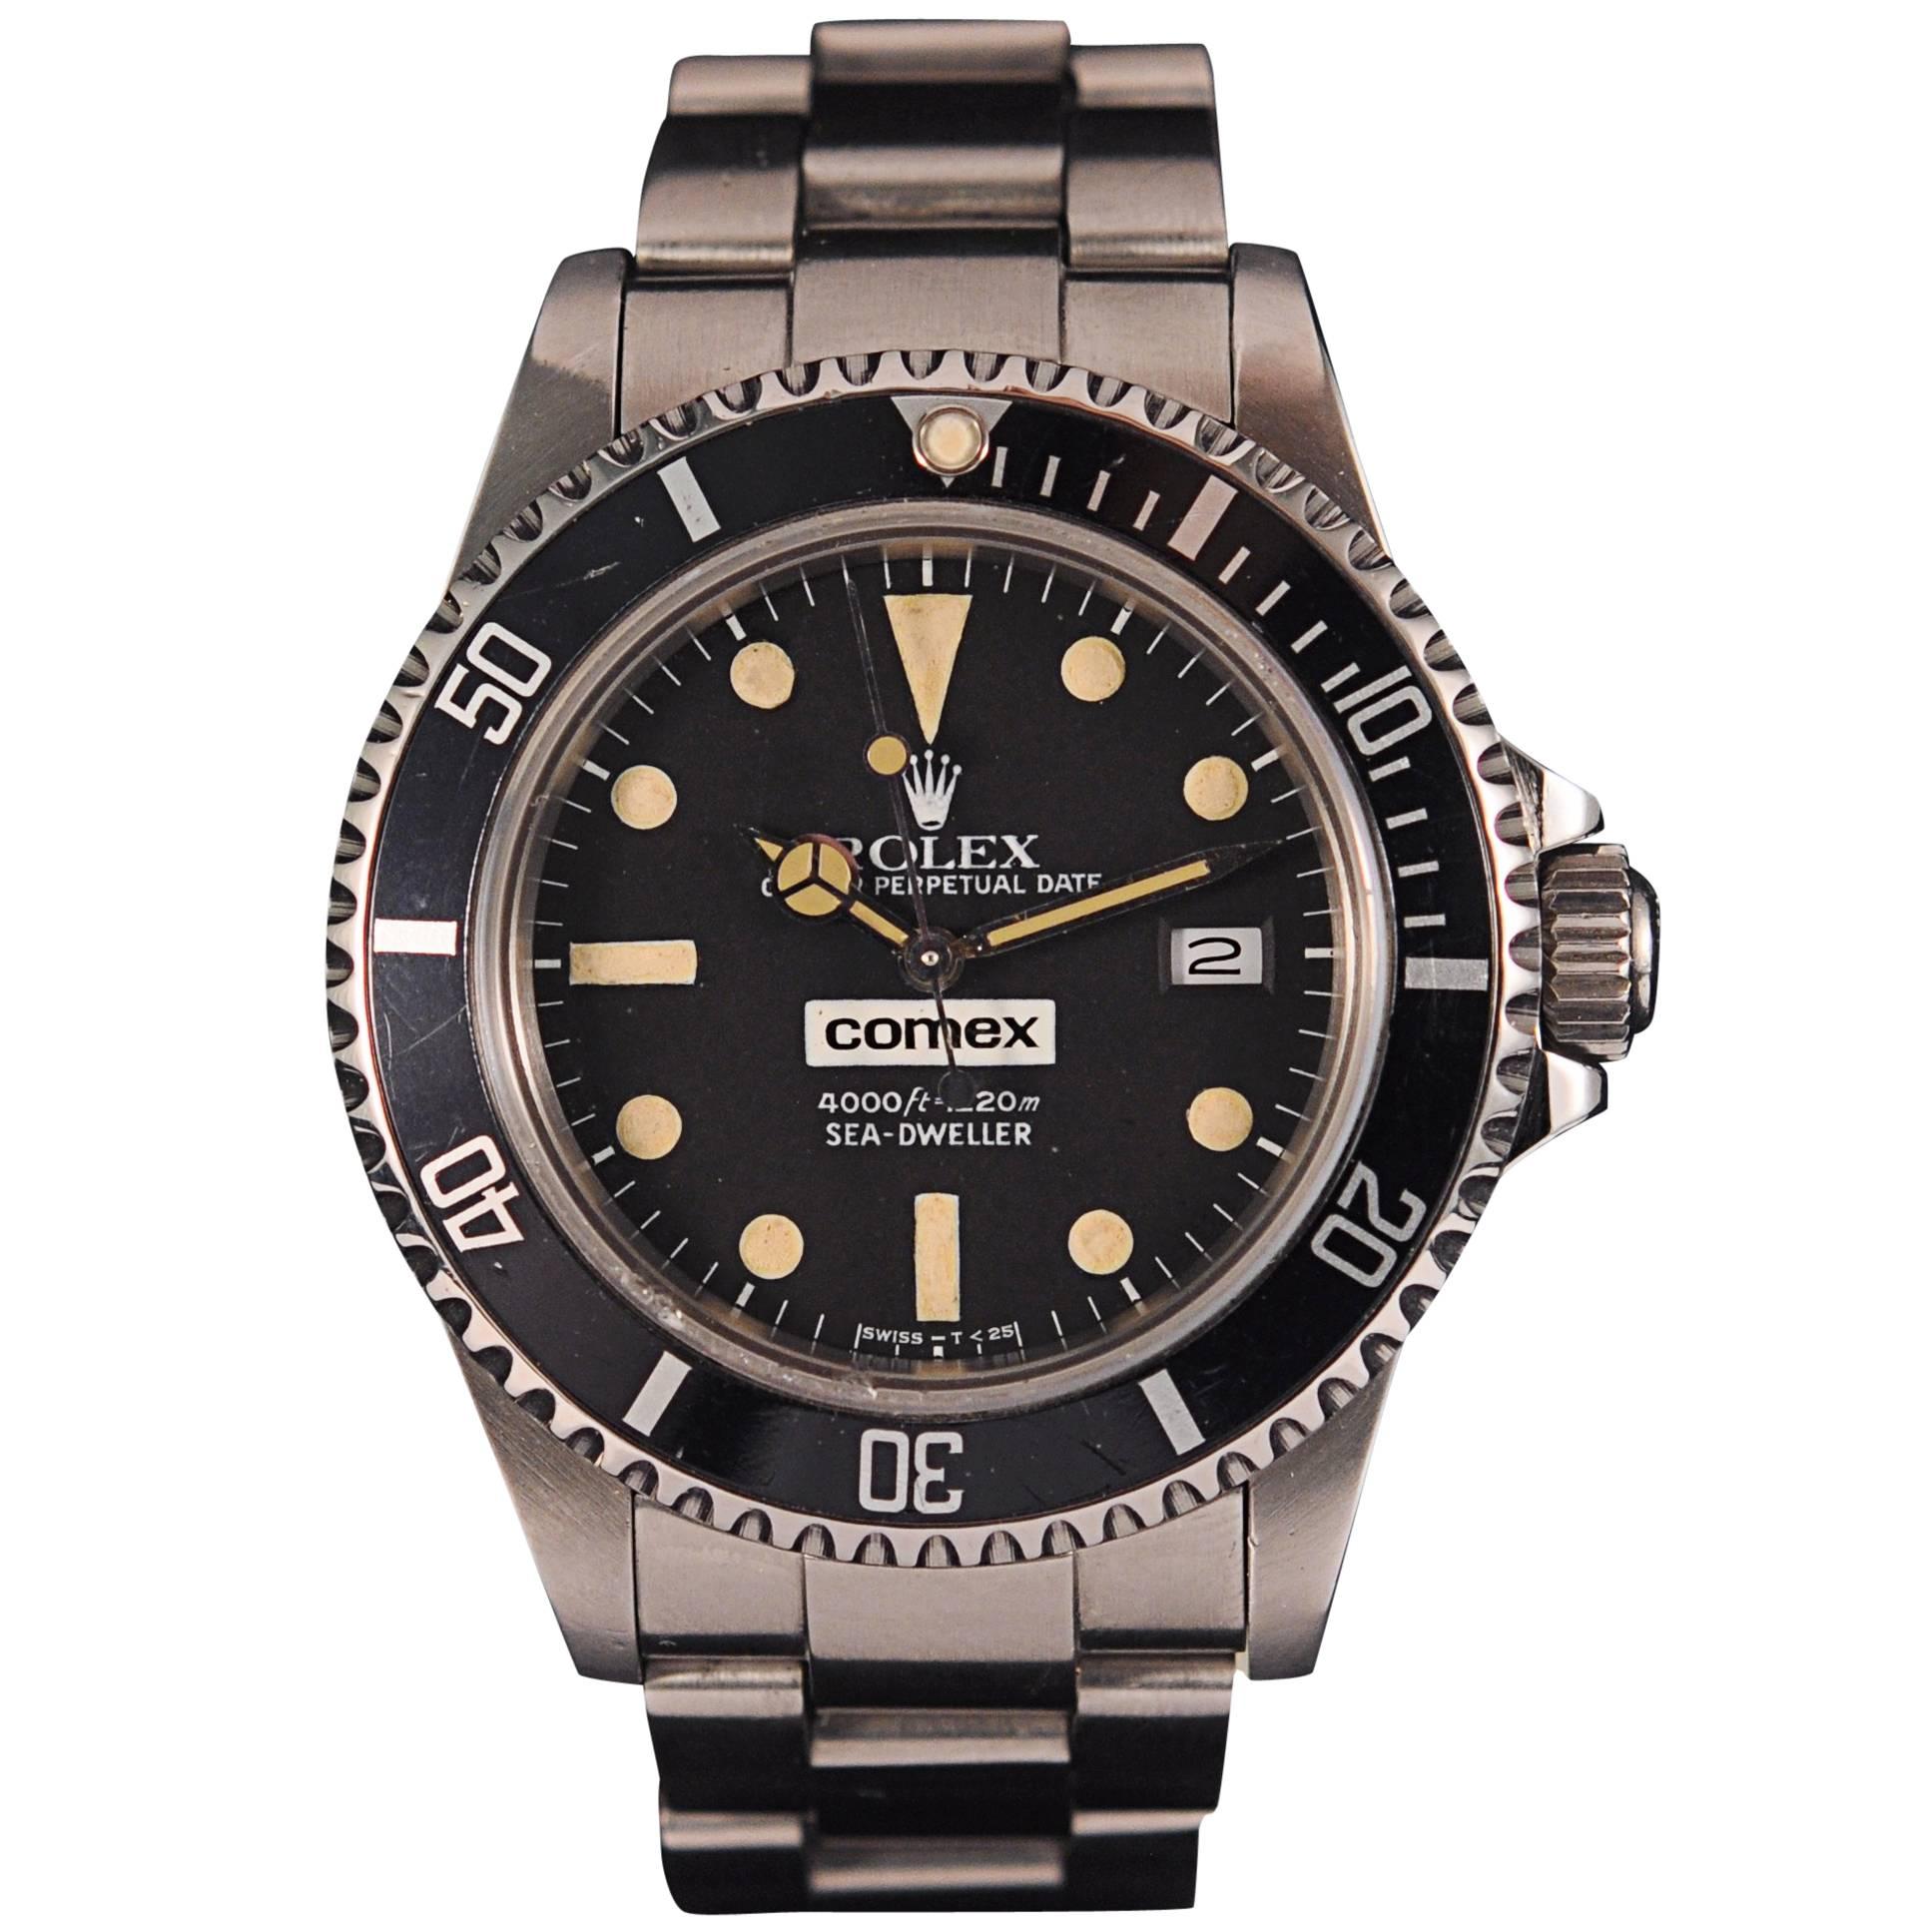 Rolex Stainless Steel Sea-Dweller Comex 16660 Diver's Wristwatch For Sale